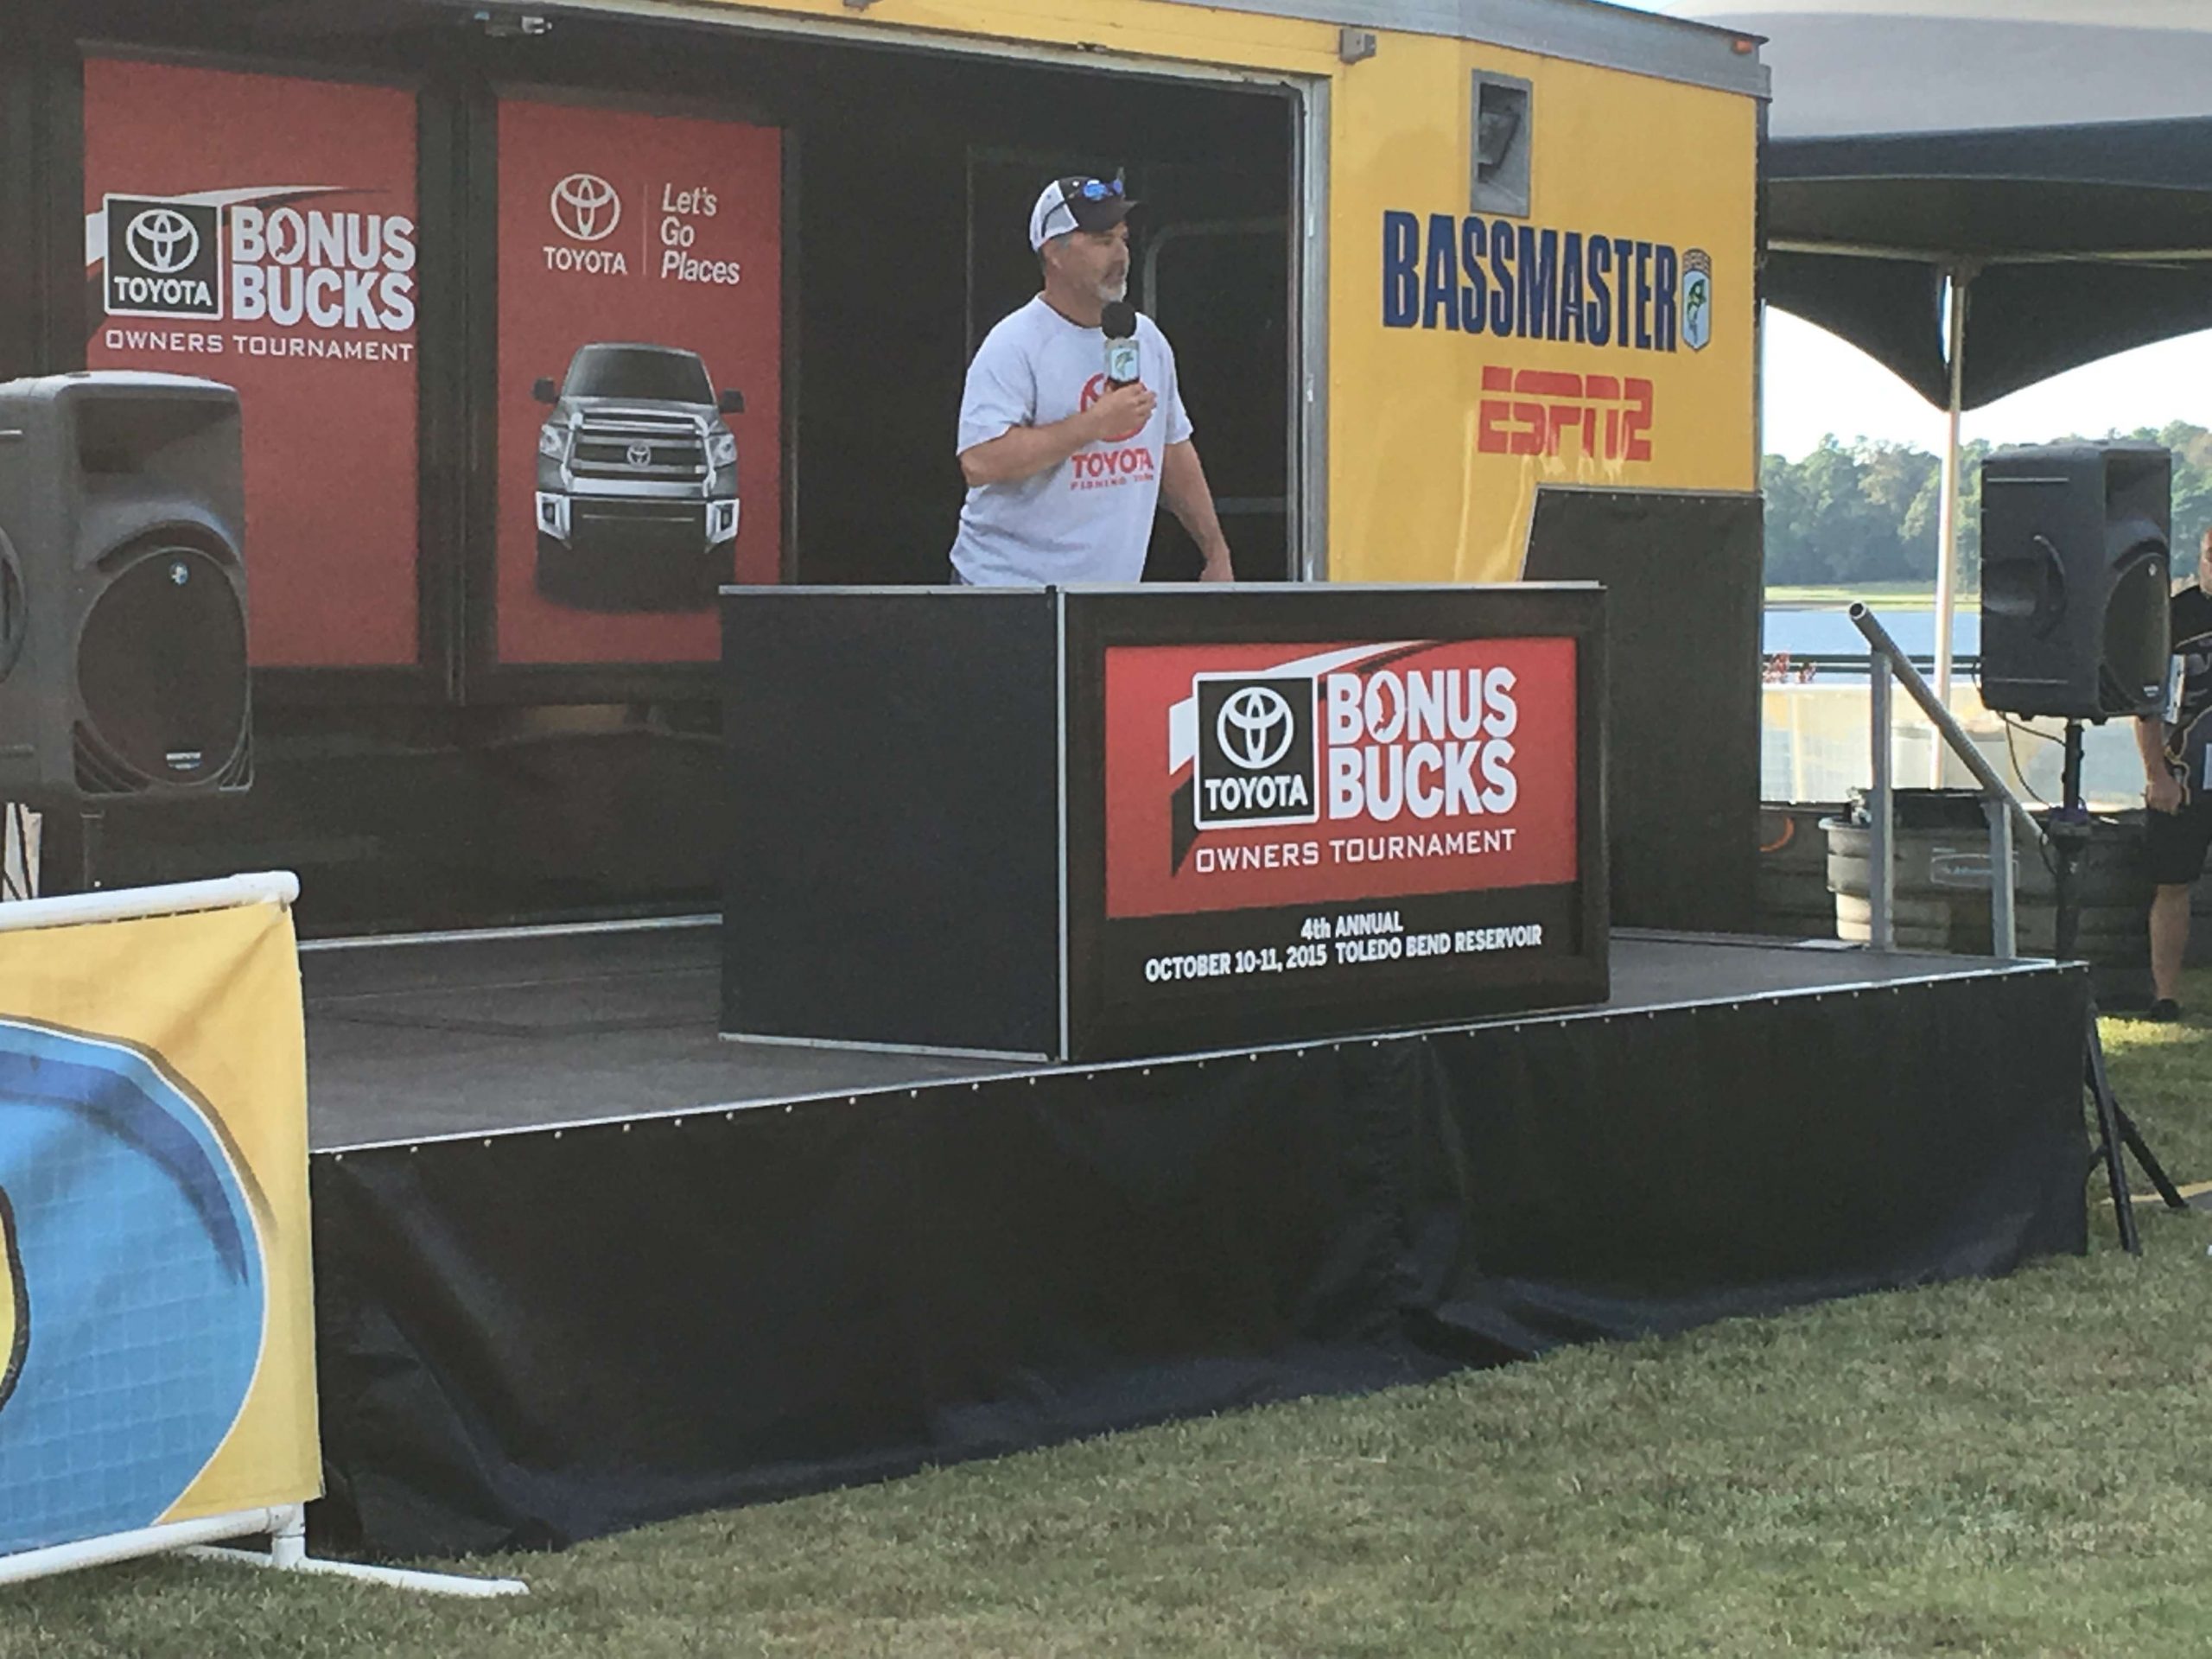 Bassmaster Editor James Hall is also the Master of Ceremonies for this event. Registration is officially underway.